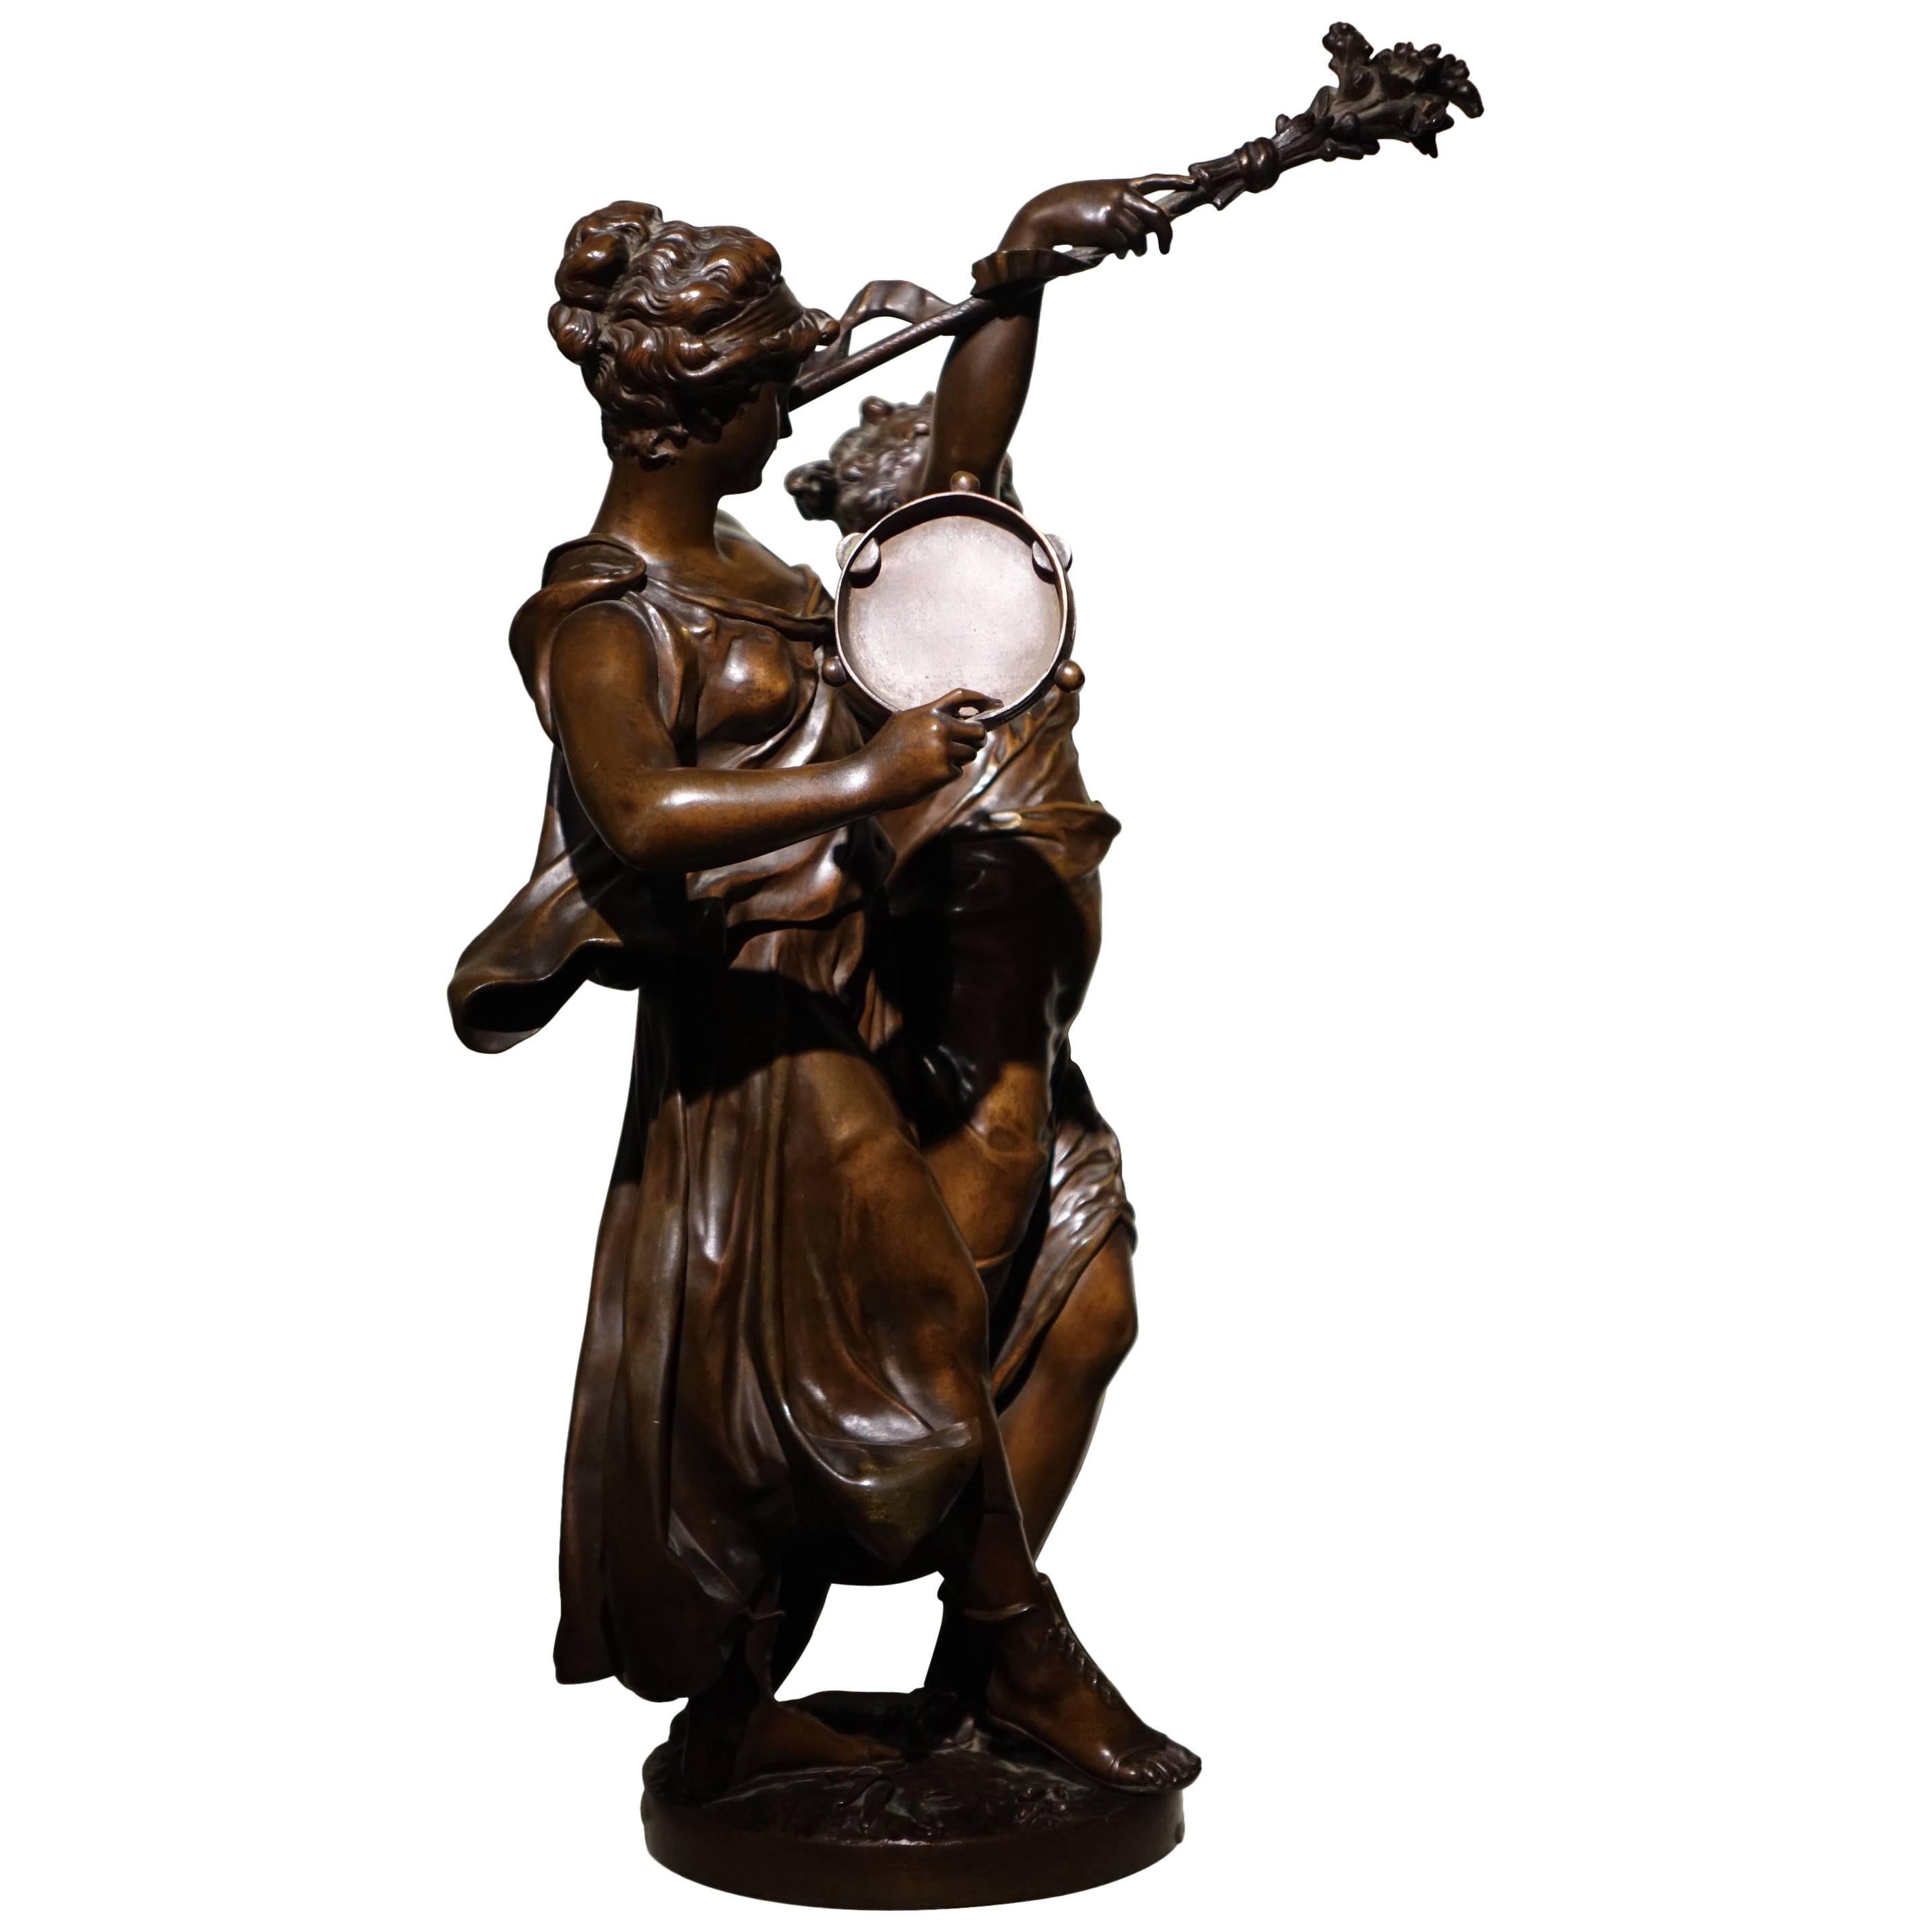  Two Girls Dancing and Playing Tambourine, Bronze  Sculpture Signed Dumaige For Sale